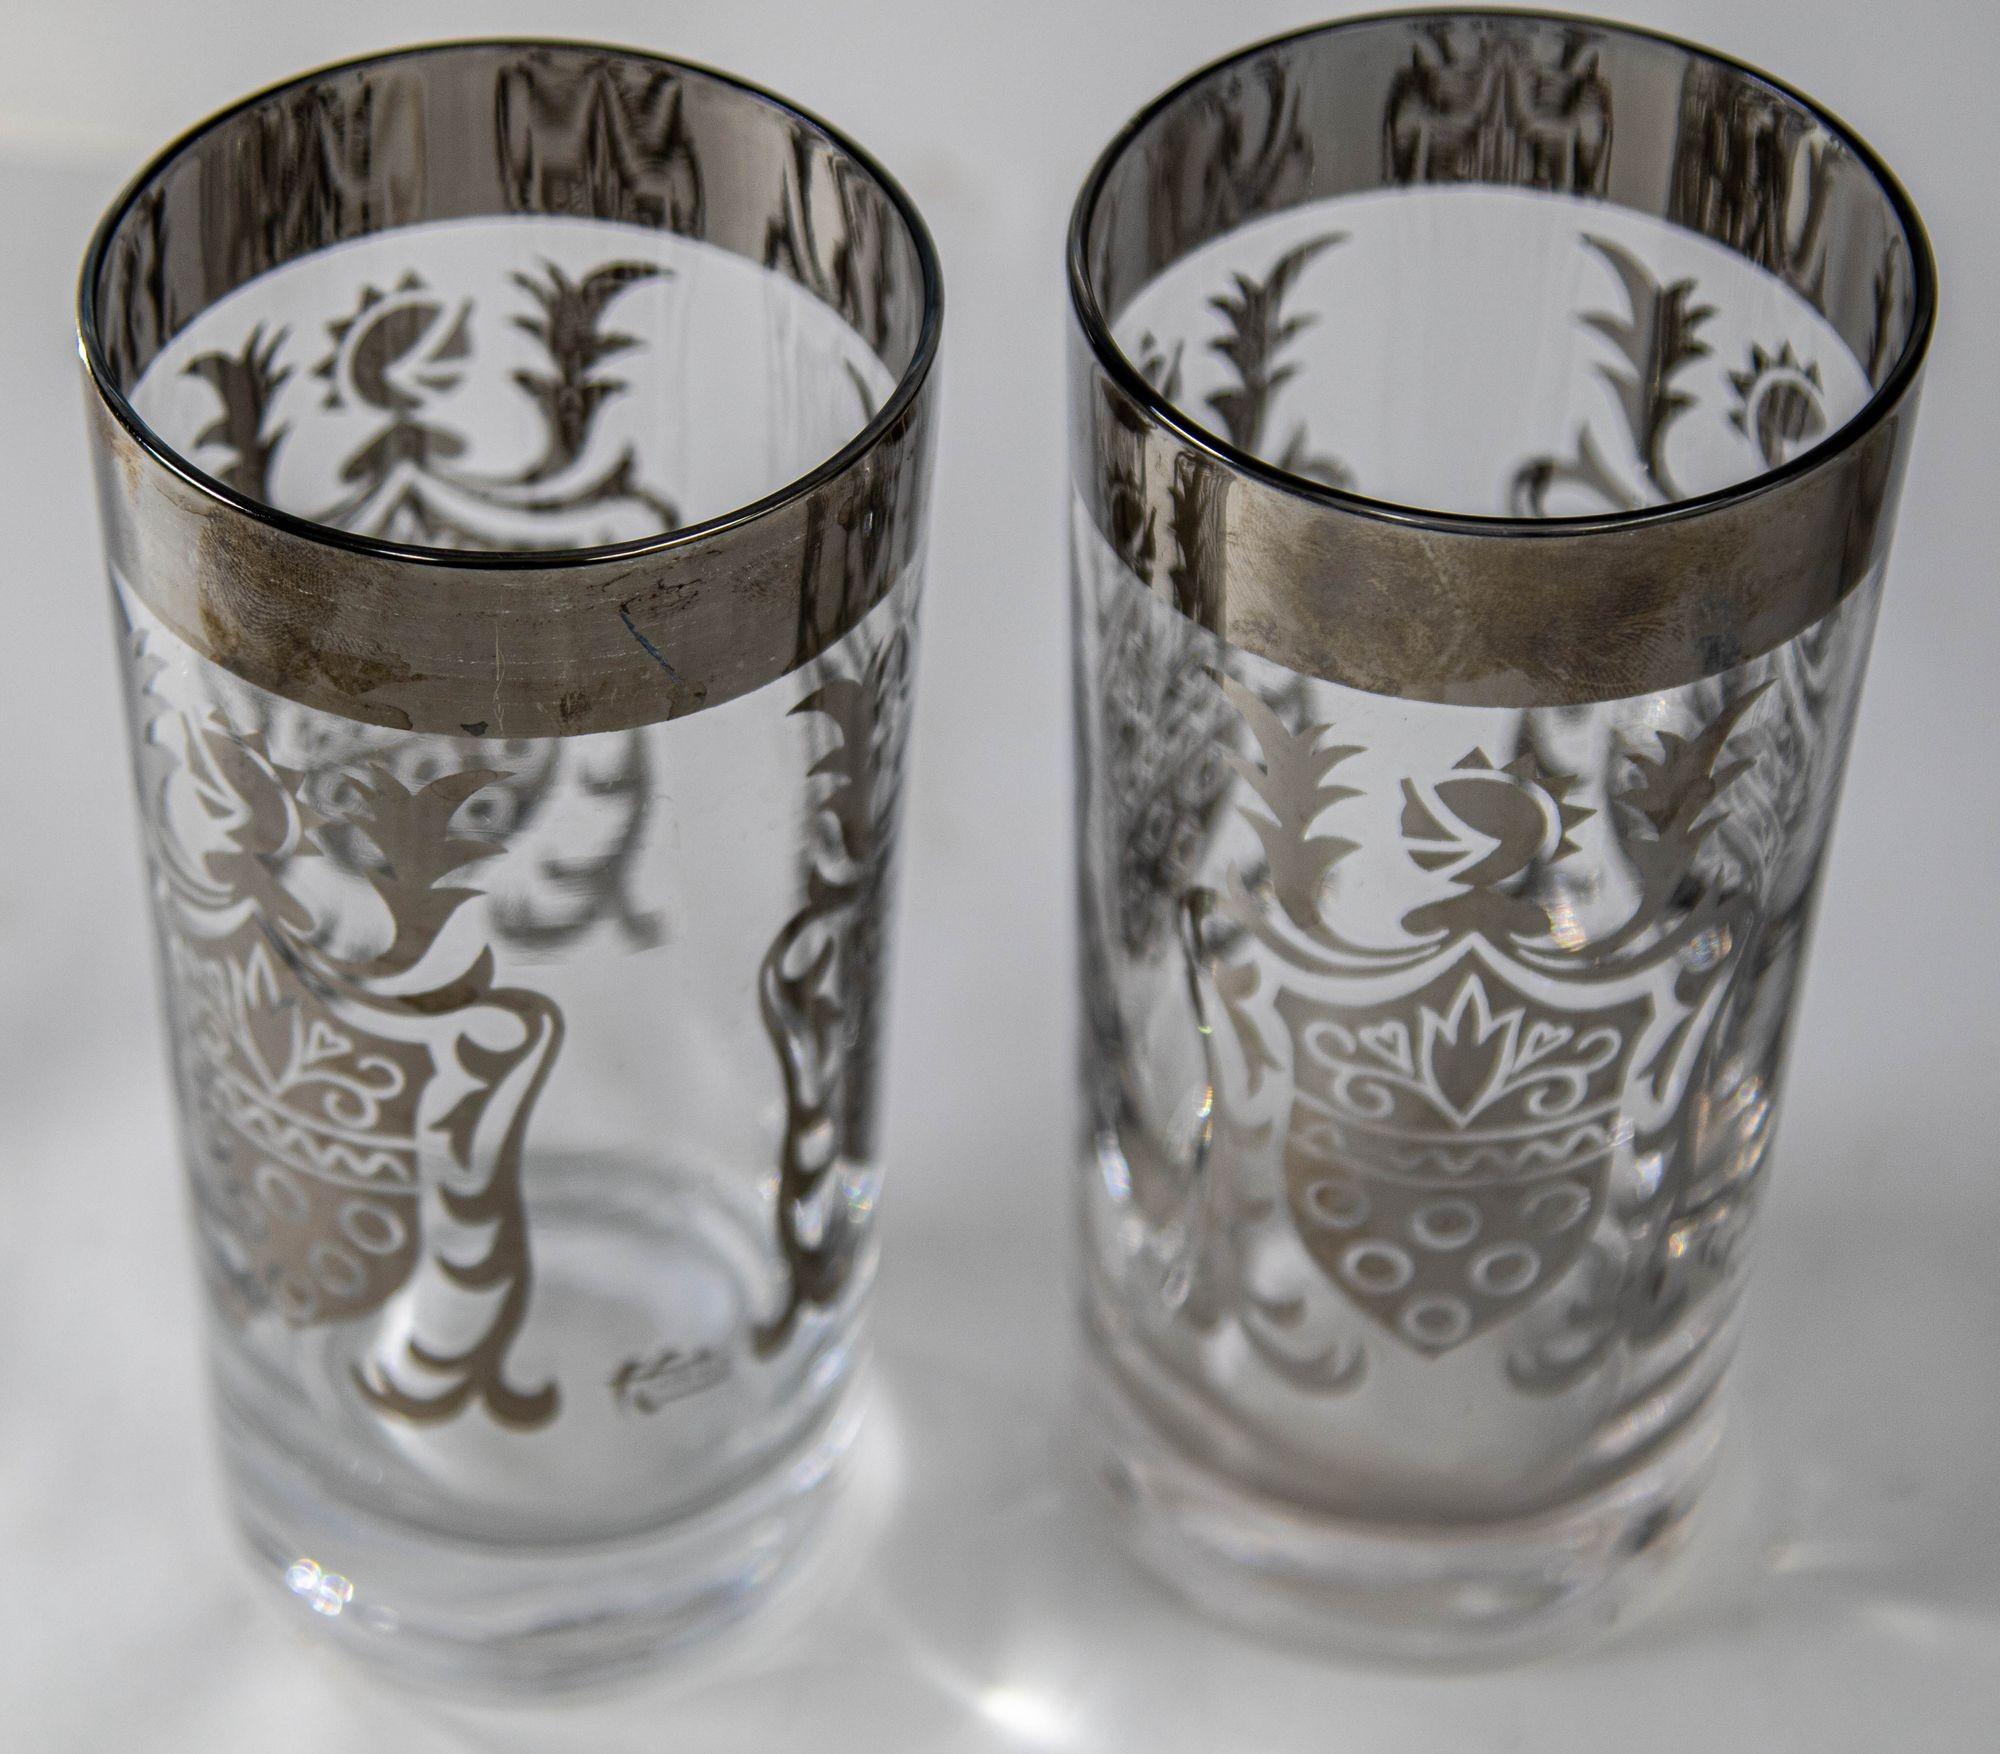 Vintage Kimiko Signed Silver High Ball Glasses Set of 8 with Carrying Caddy 60's In Good Condition For Sale In North Hollywood, CA